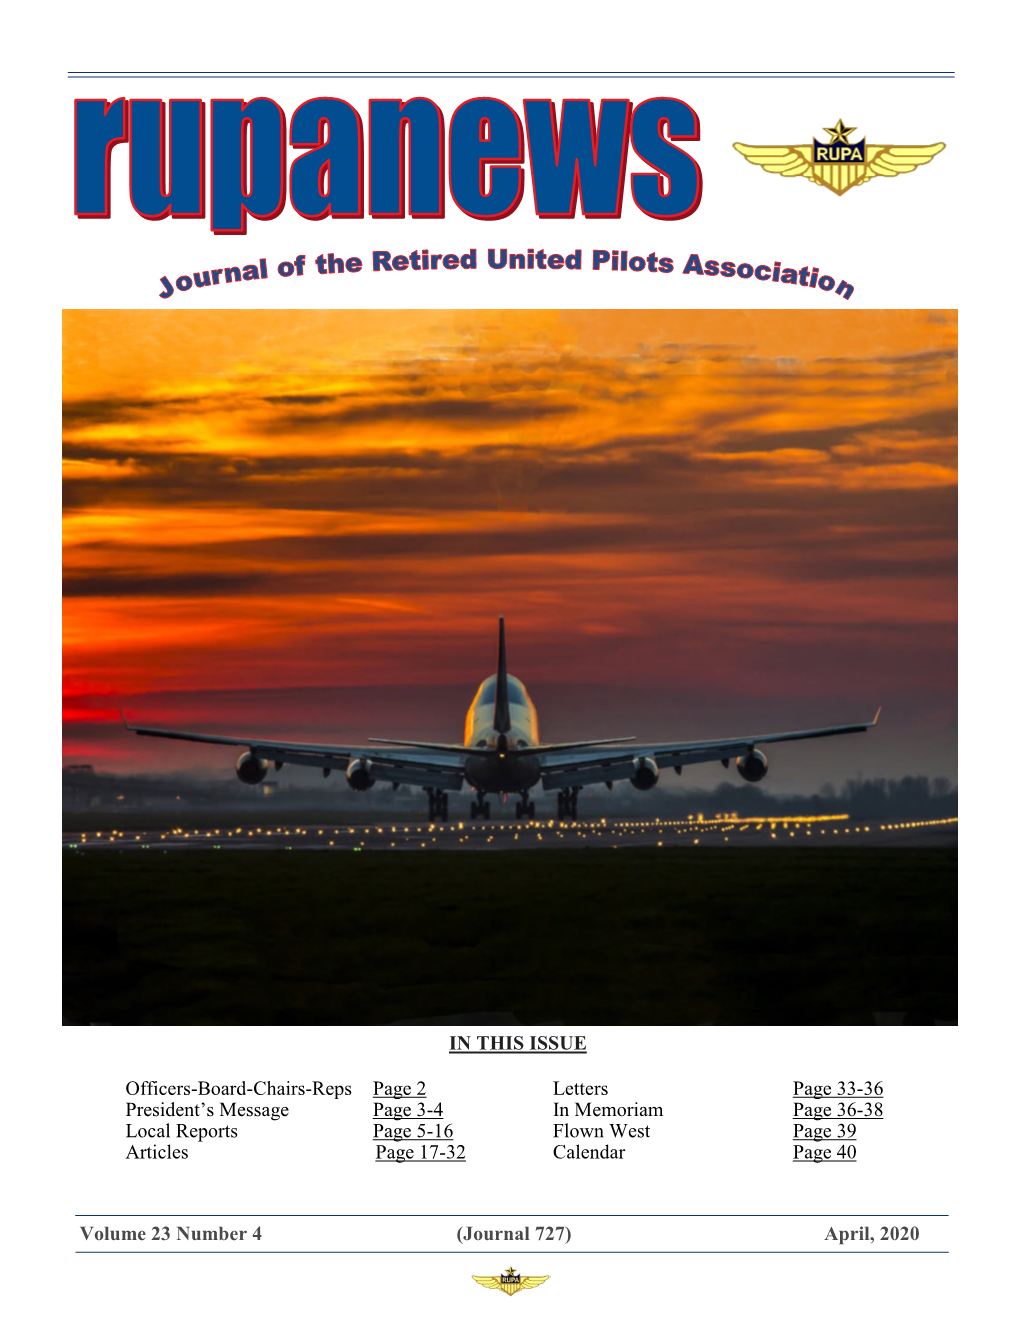 (Journal 727) April, 2020 in THIS ISSUE Officers-Board-Chairs-Reps